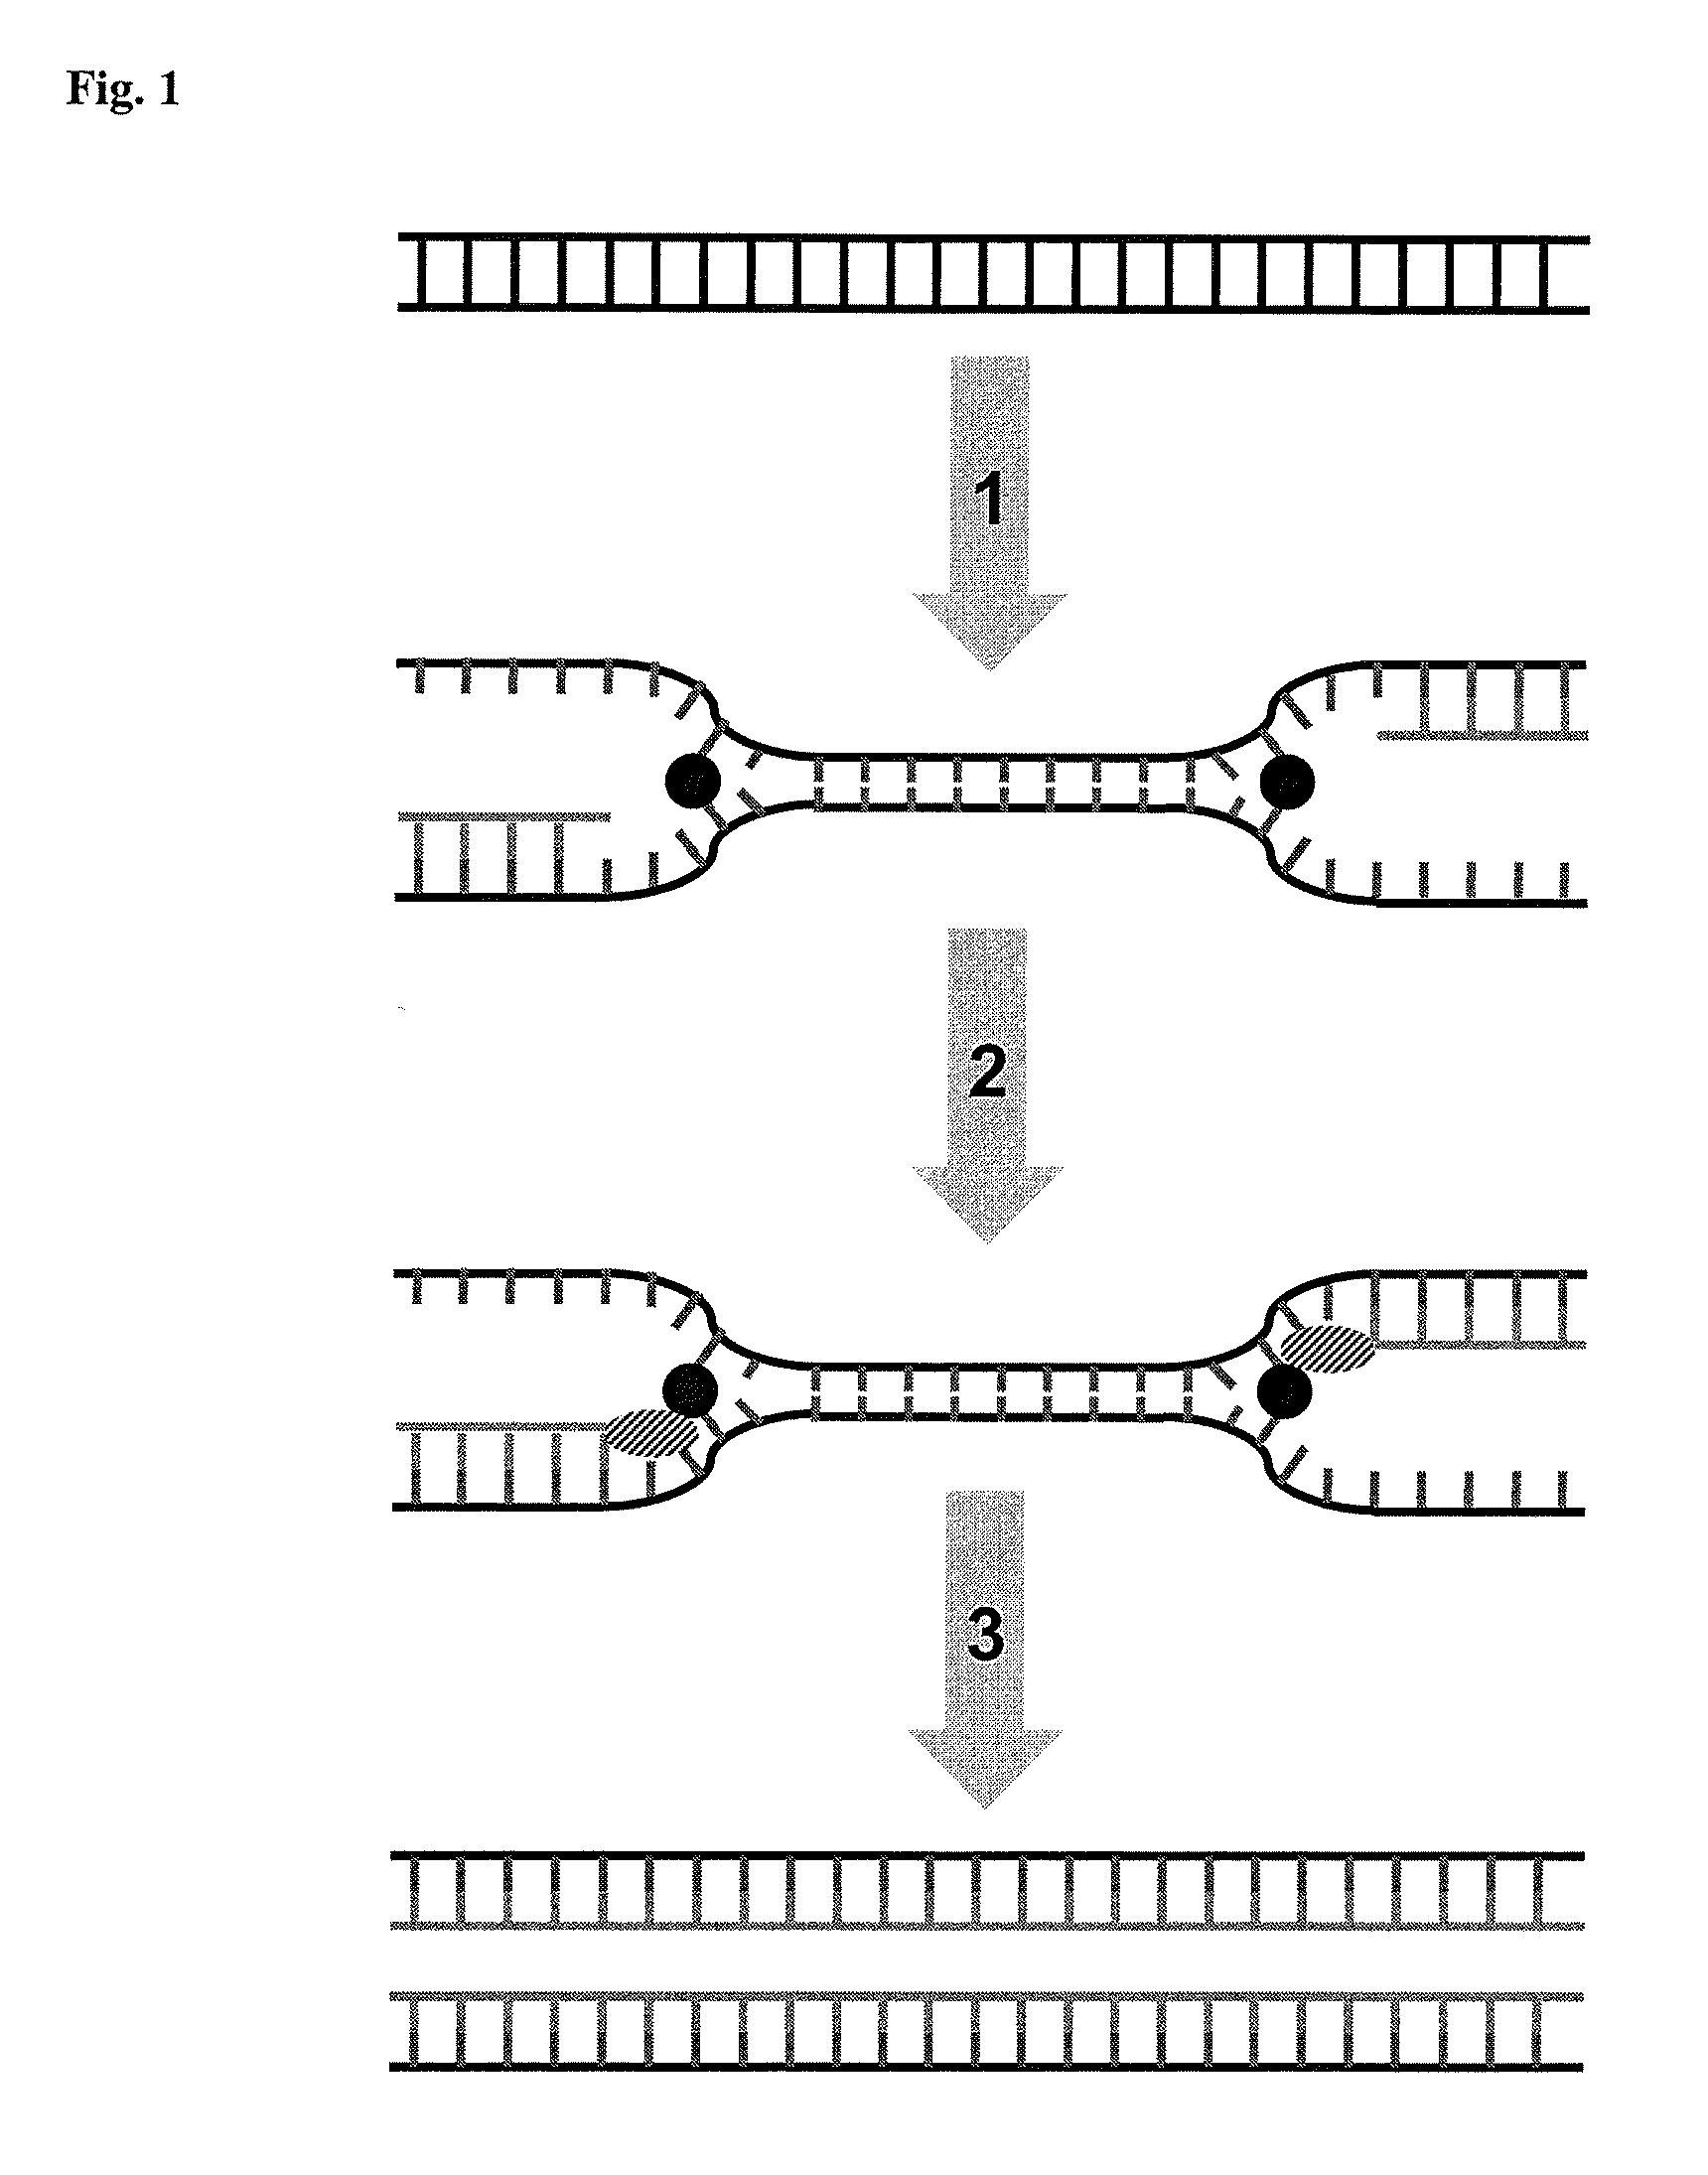 Helicase dependent isothermal amplification using nicking enzymes